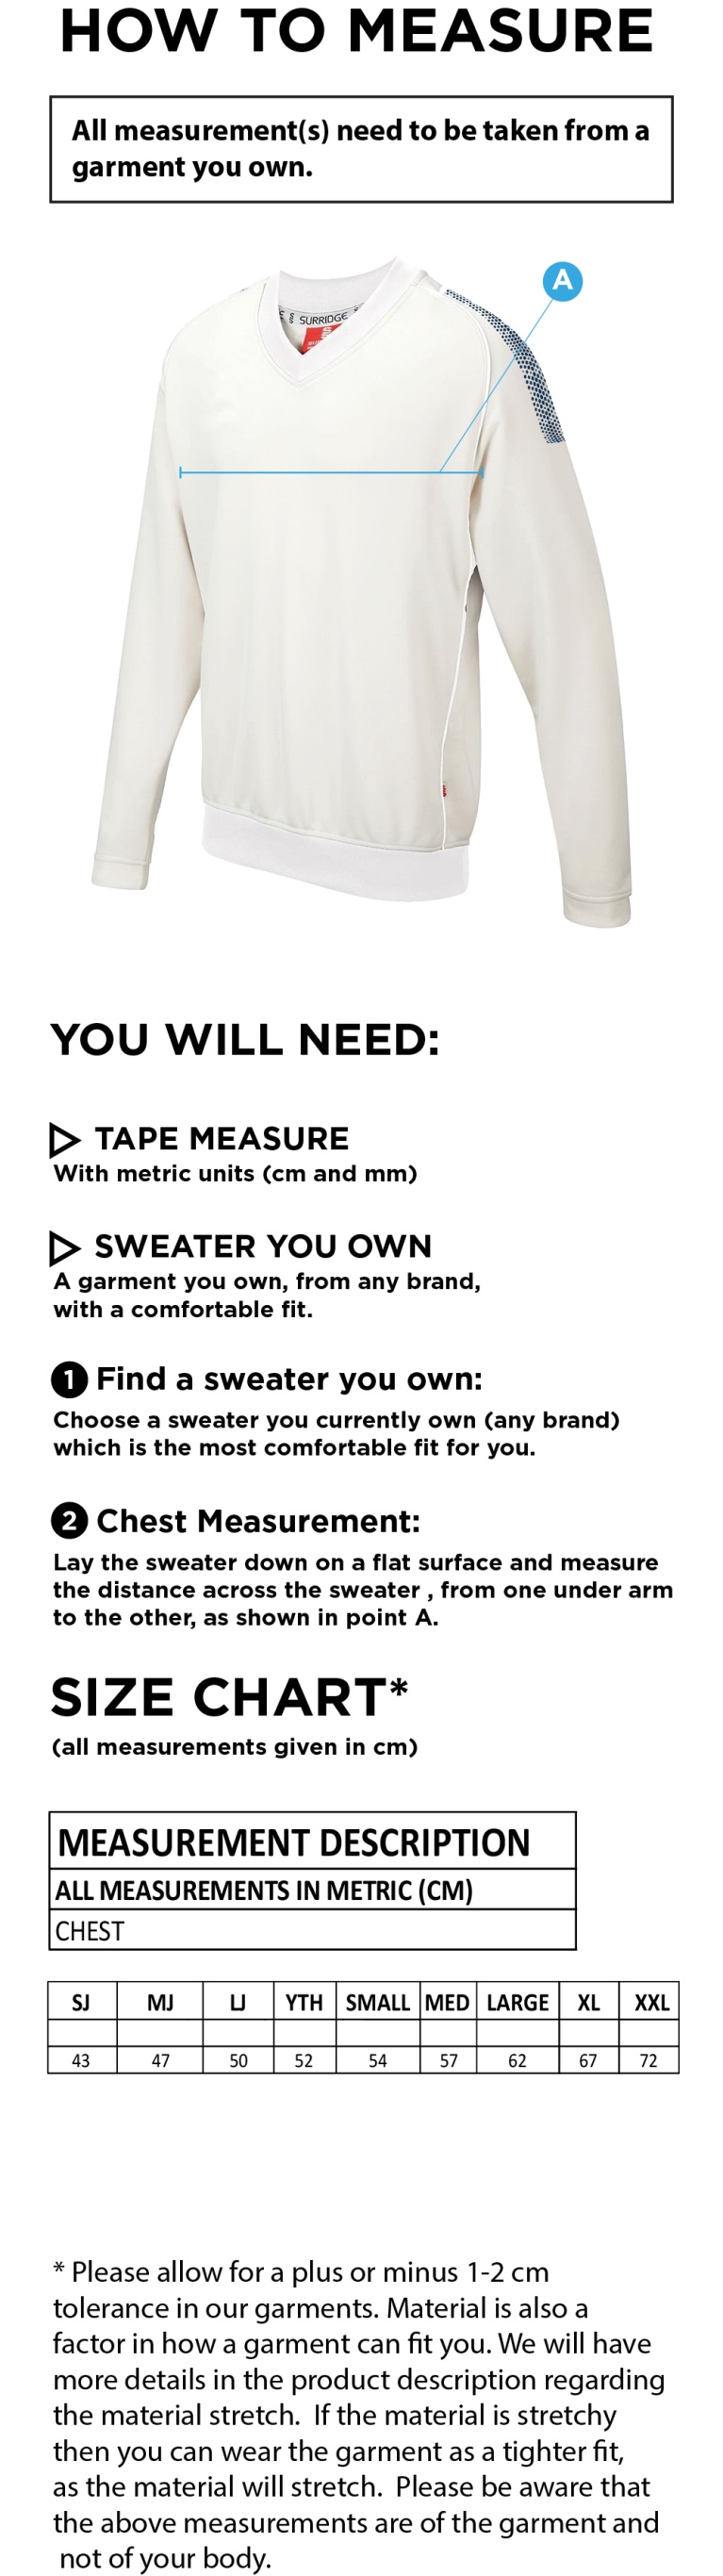 Dual Long Sleeve Sweater - Size Guide